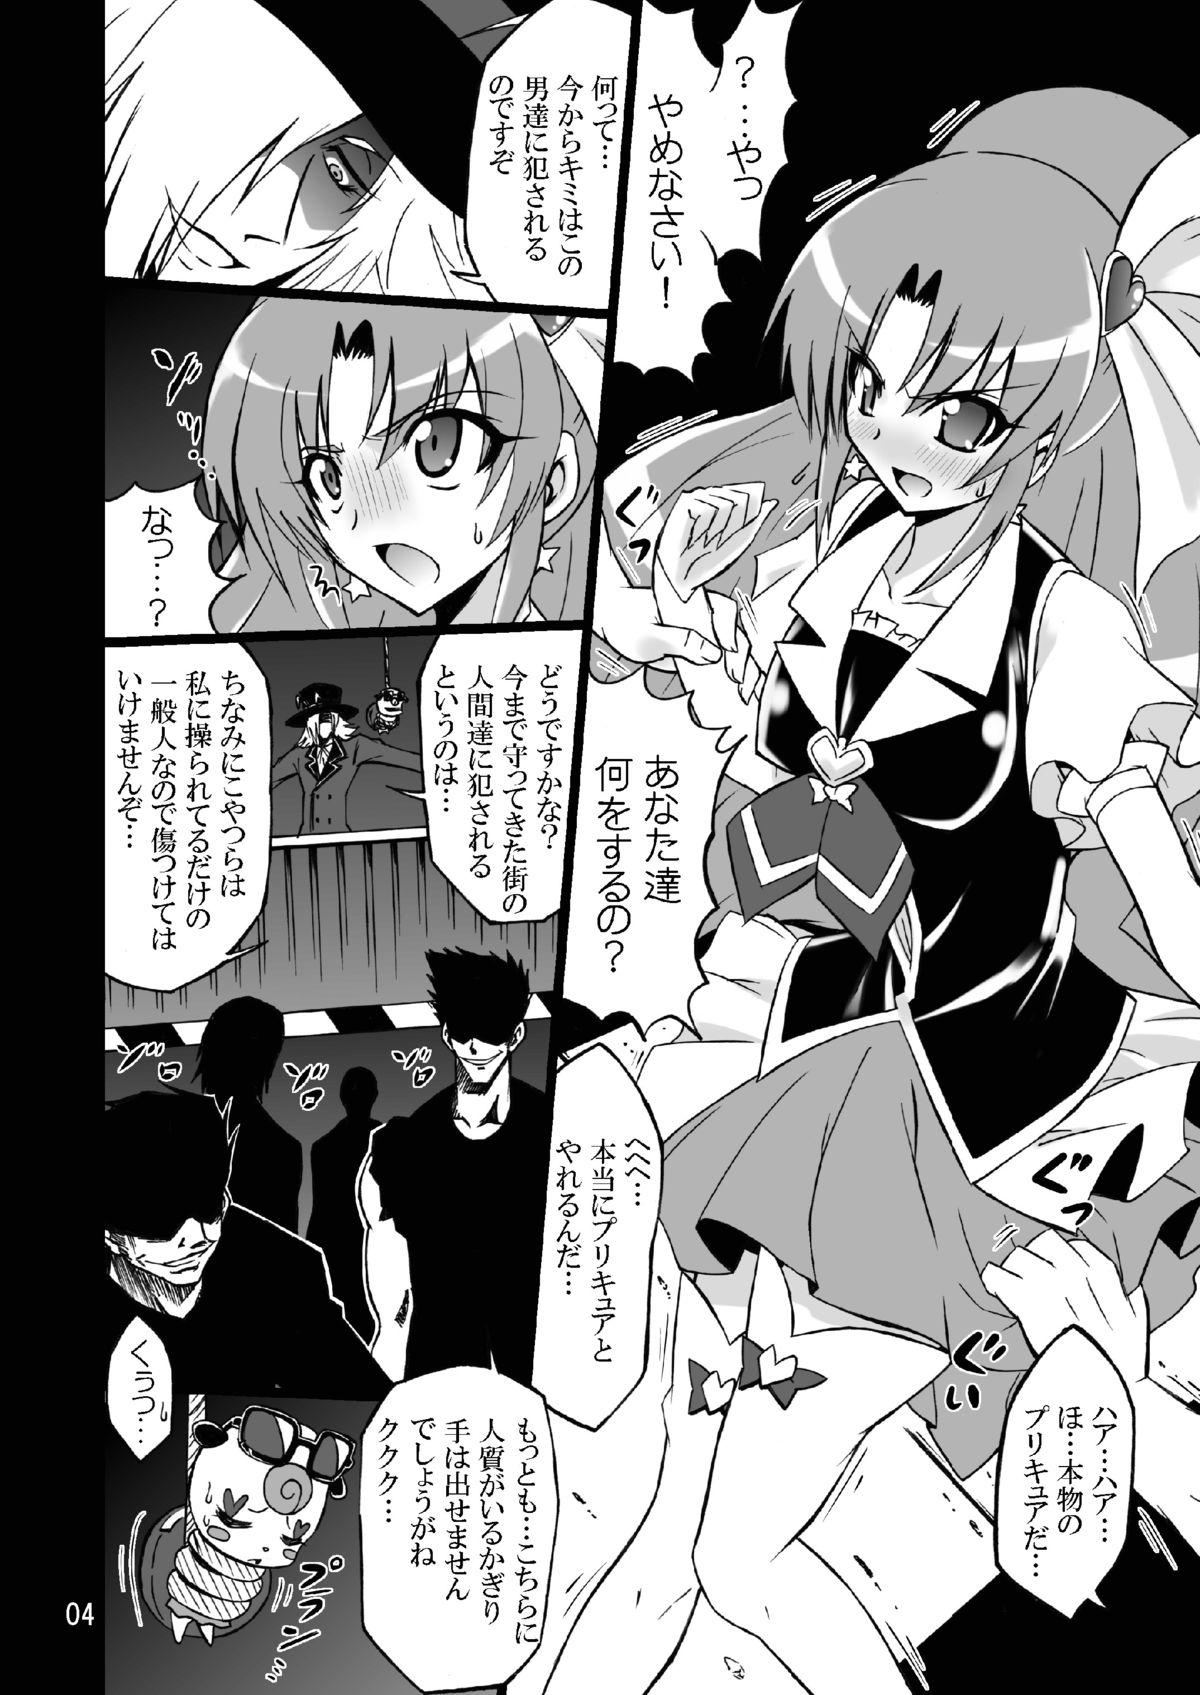 Ex Gf WHEEL of FORTUNE - Dokidoki precure Happinesscharge precure Fitness - Page 4